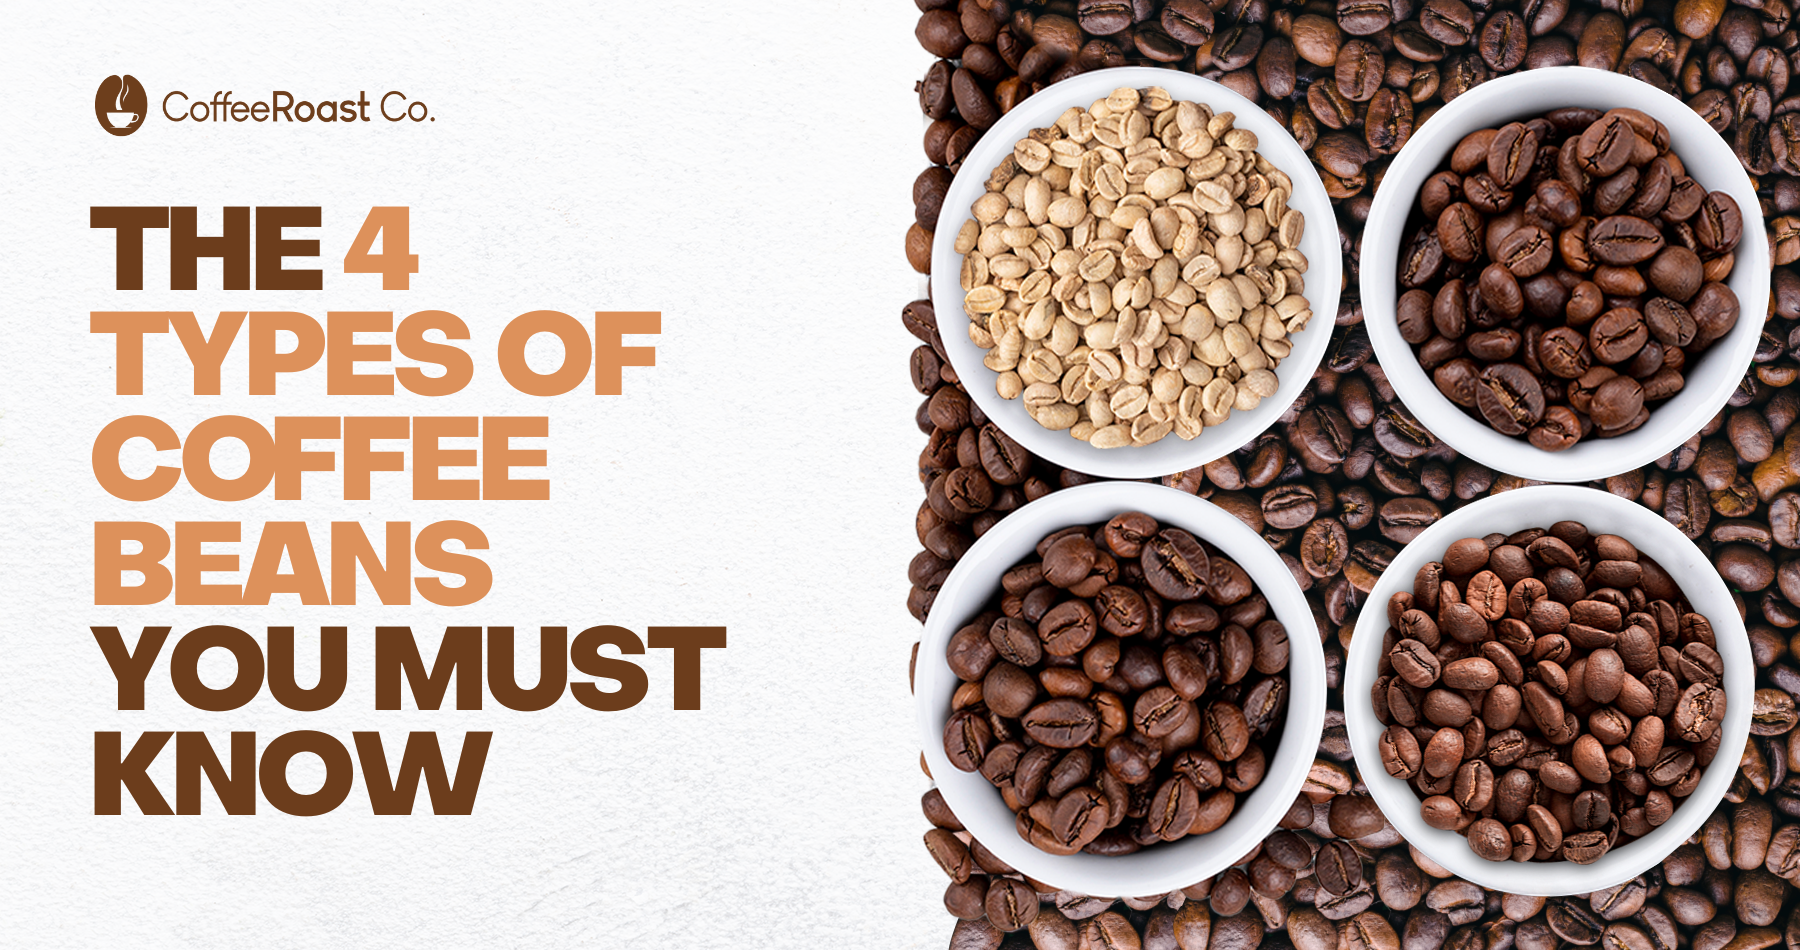 The 4 Types of Coffee Beans You Must Know